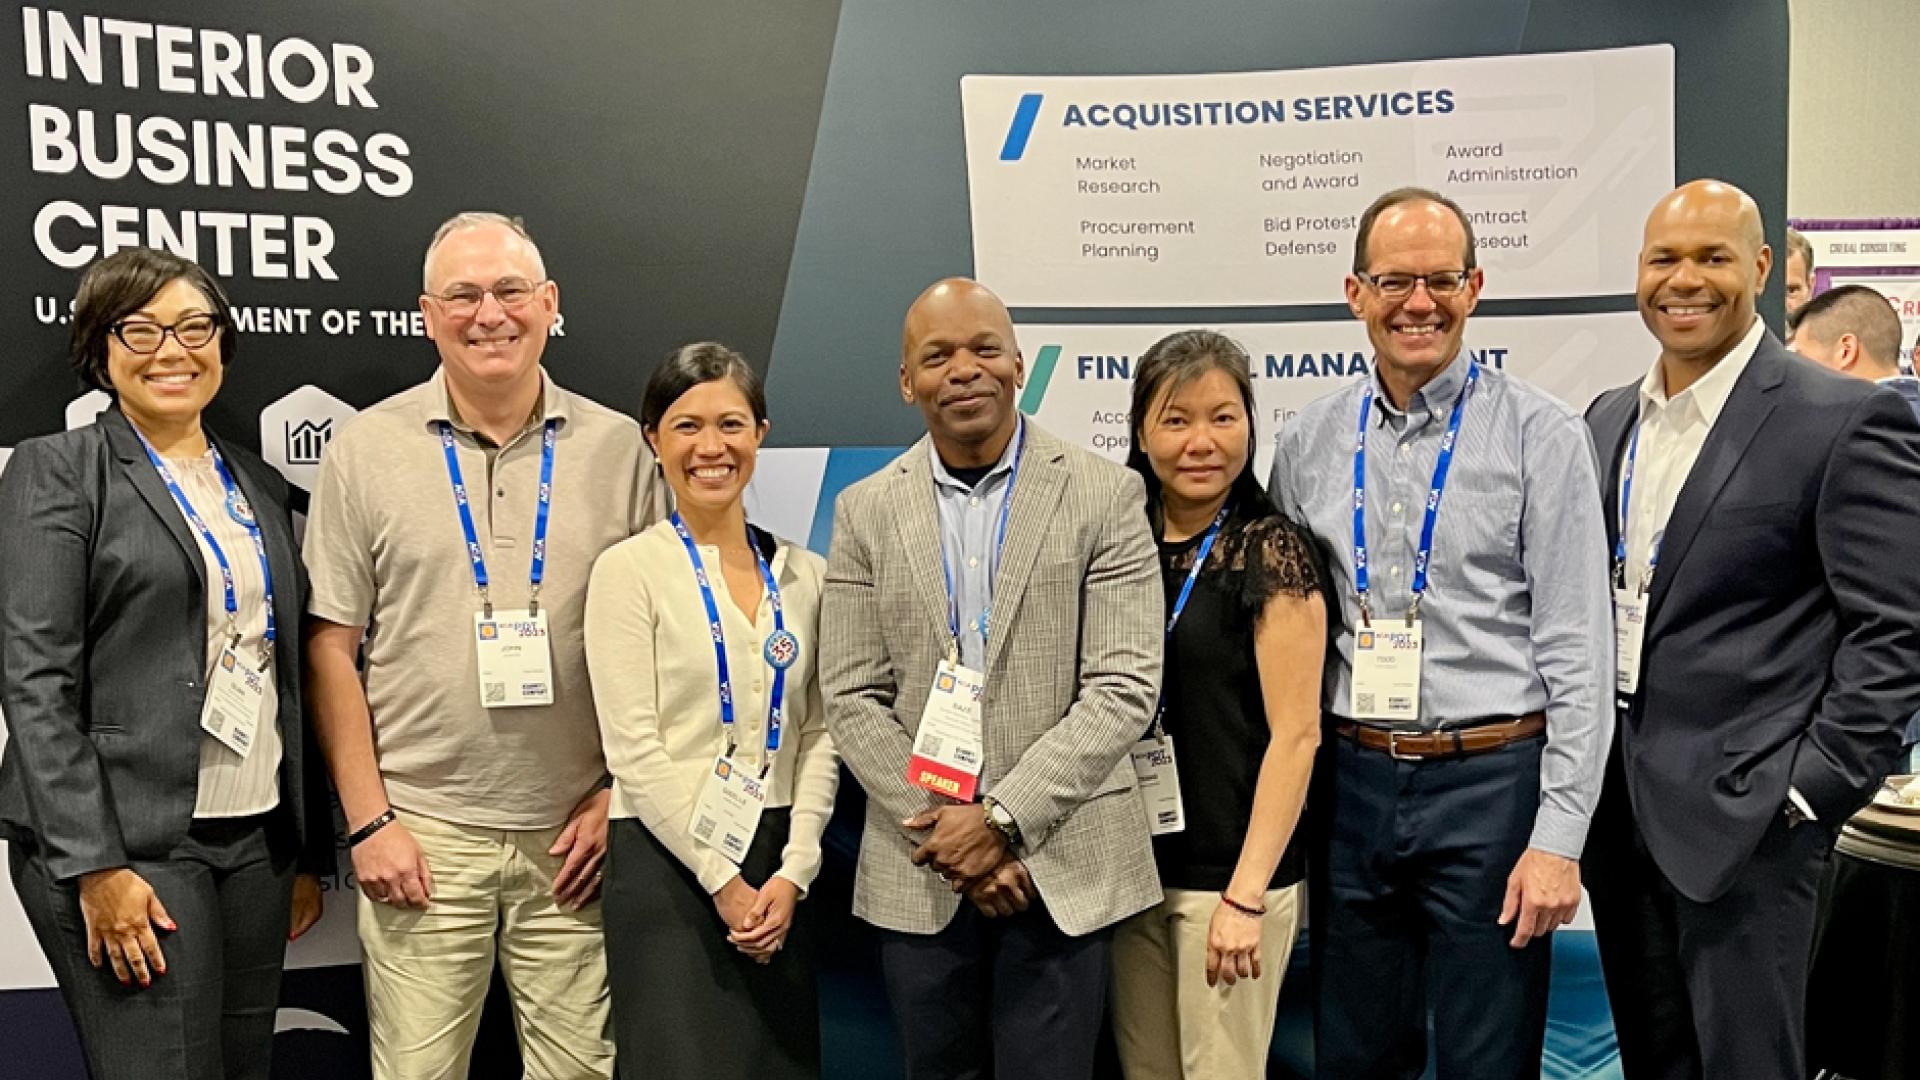 From left to right: Quan Boatman, IBC Deputy Director; John Fix, Implementation Specialist; Giselle Sachse, Implementation Specialist; Wendell 'Baze' Bazemore, IBC Financial Management Associate Director; Trang Nguyen, Systems Accountant; Todd Adler, Fina